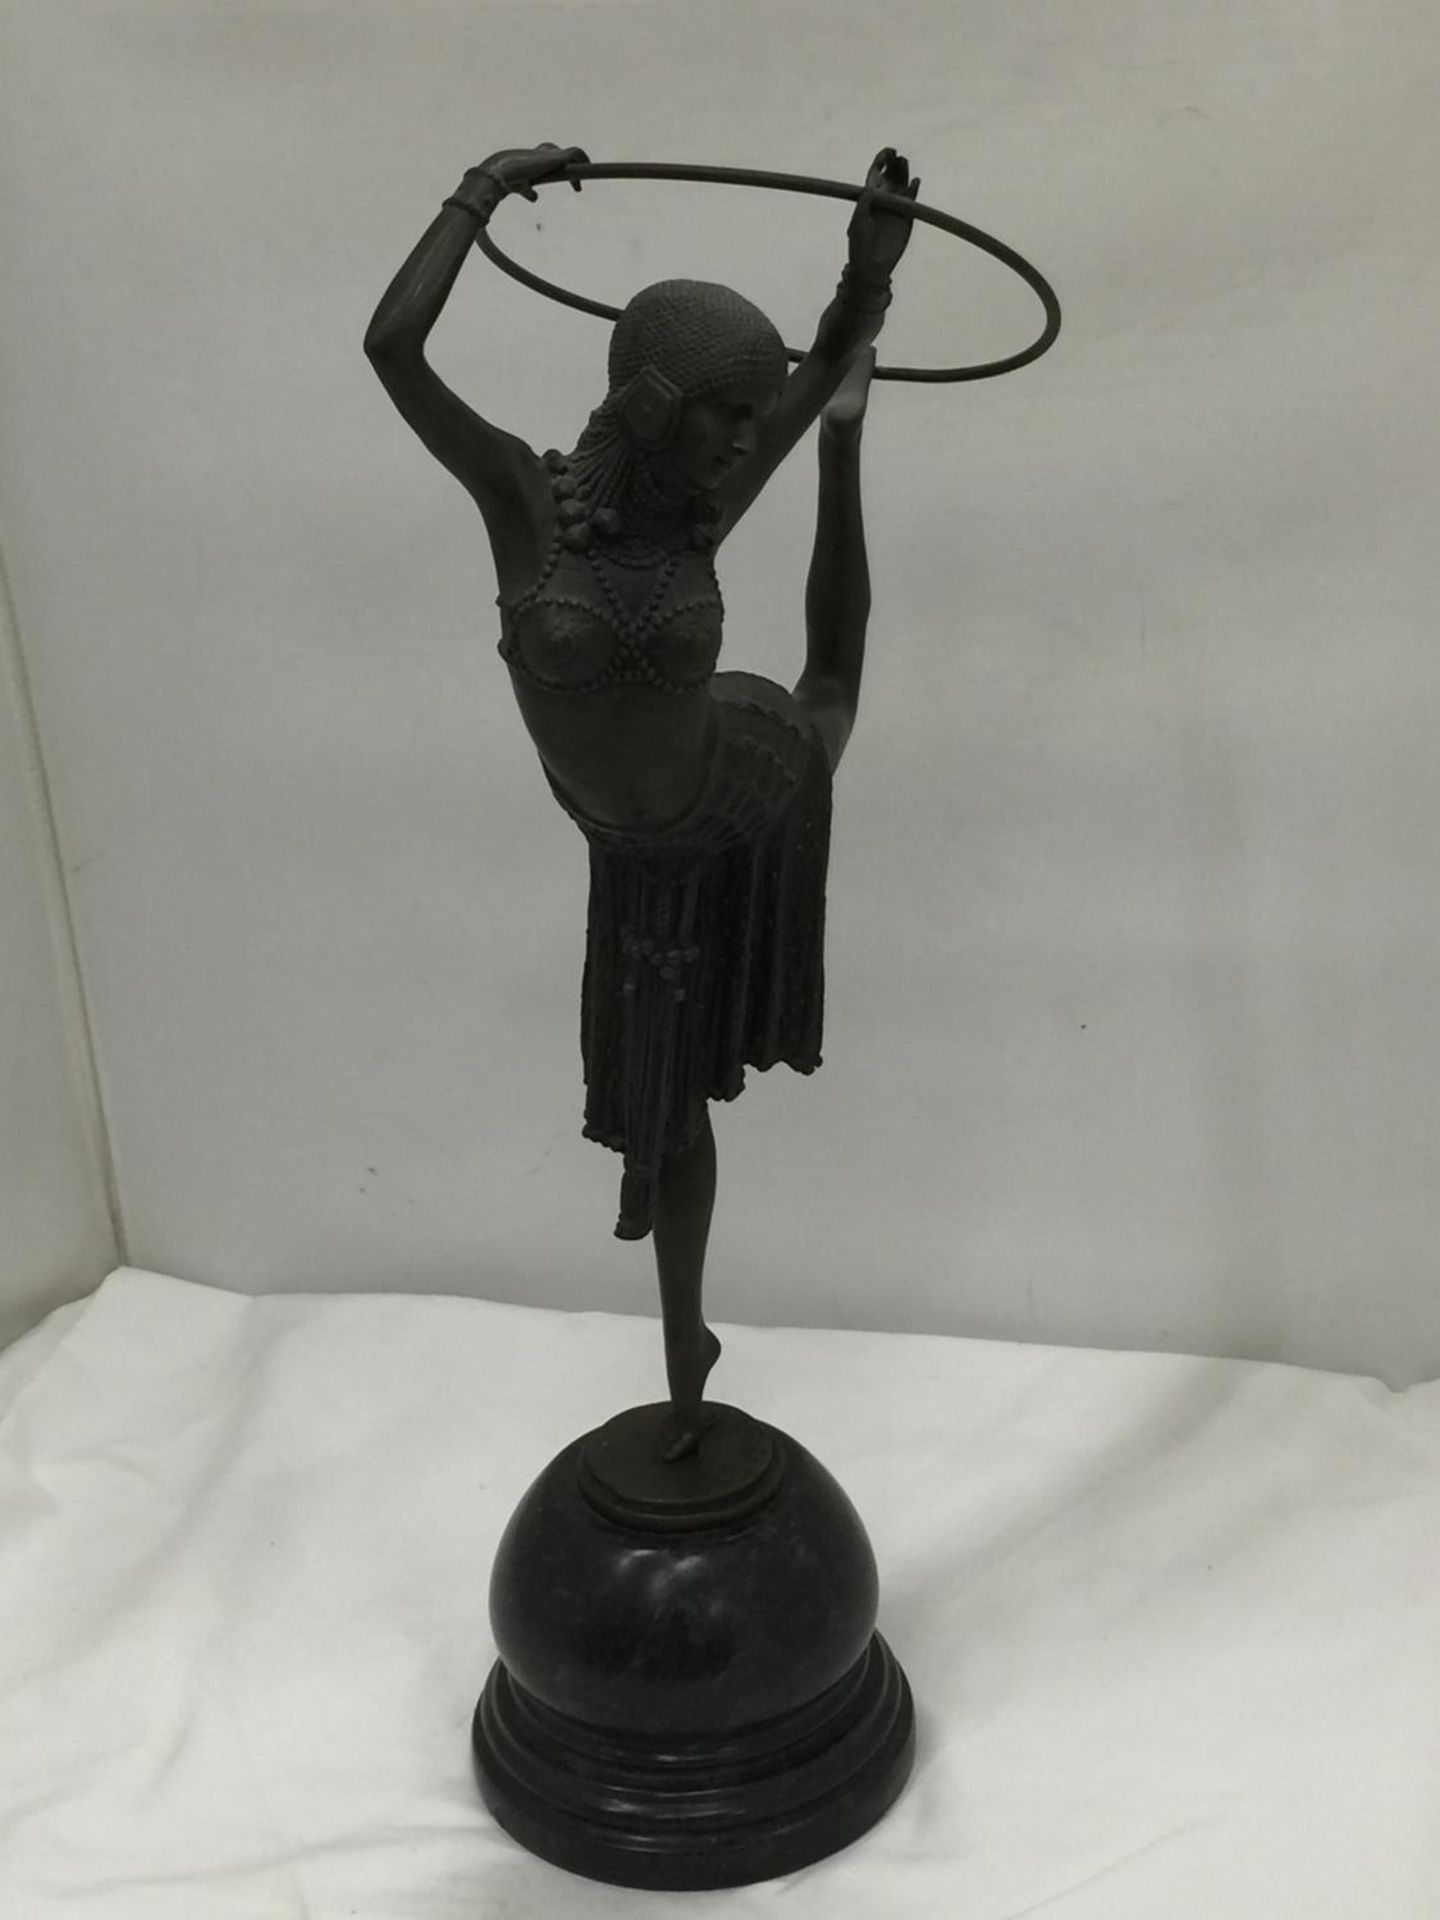 AN ART DECO STYLE BRONZE OF AN EGYPTIAN STYLE HOOP DANCER ON A MARBLE BASE SIGNED D.H. CHIPARUS H: - Image 5 of 7